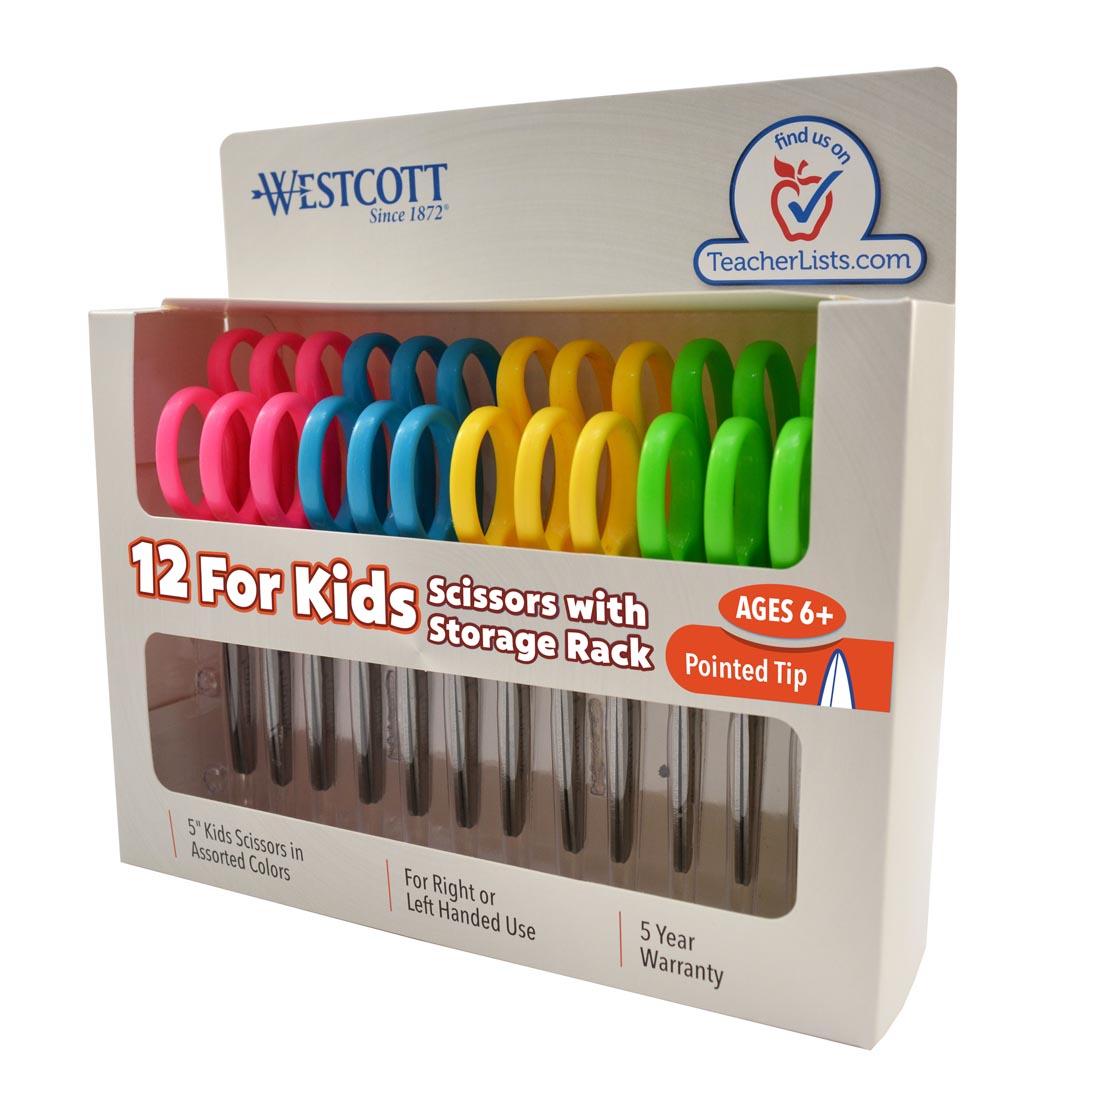 12-pack of kids' scissors with a storage rack